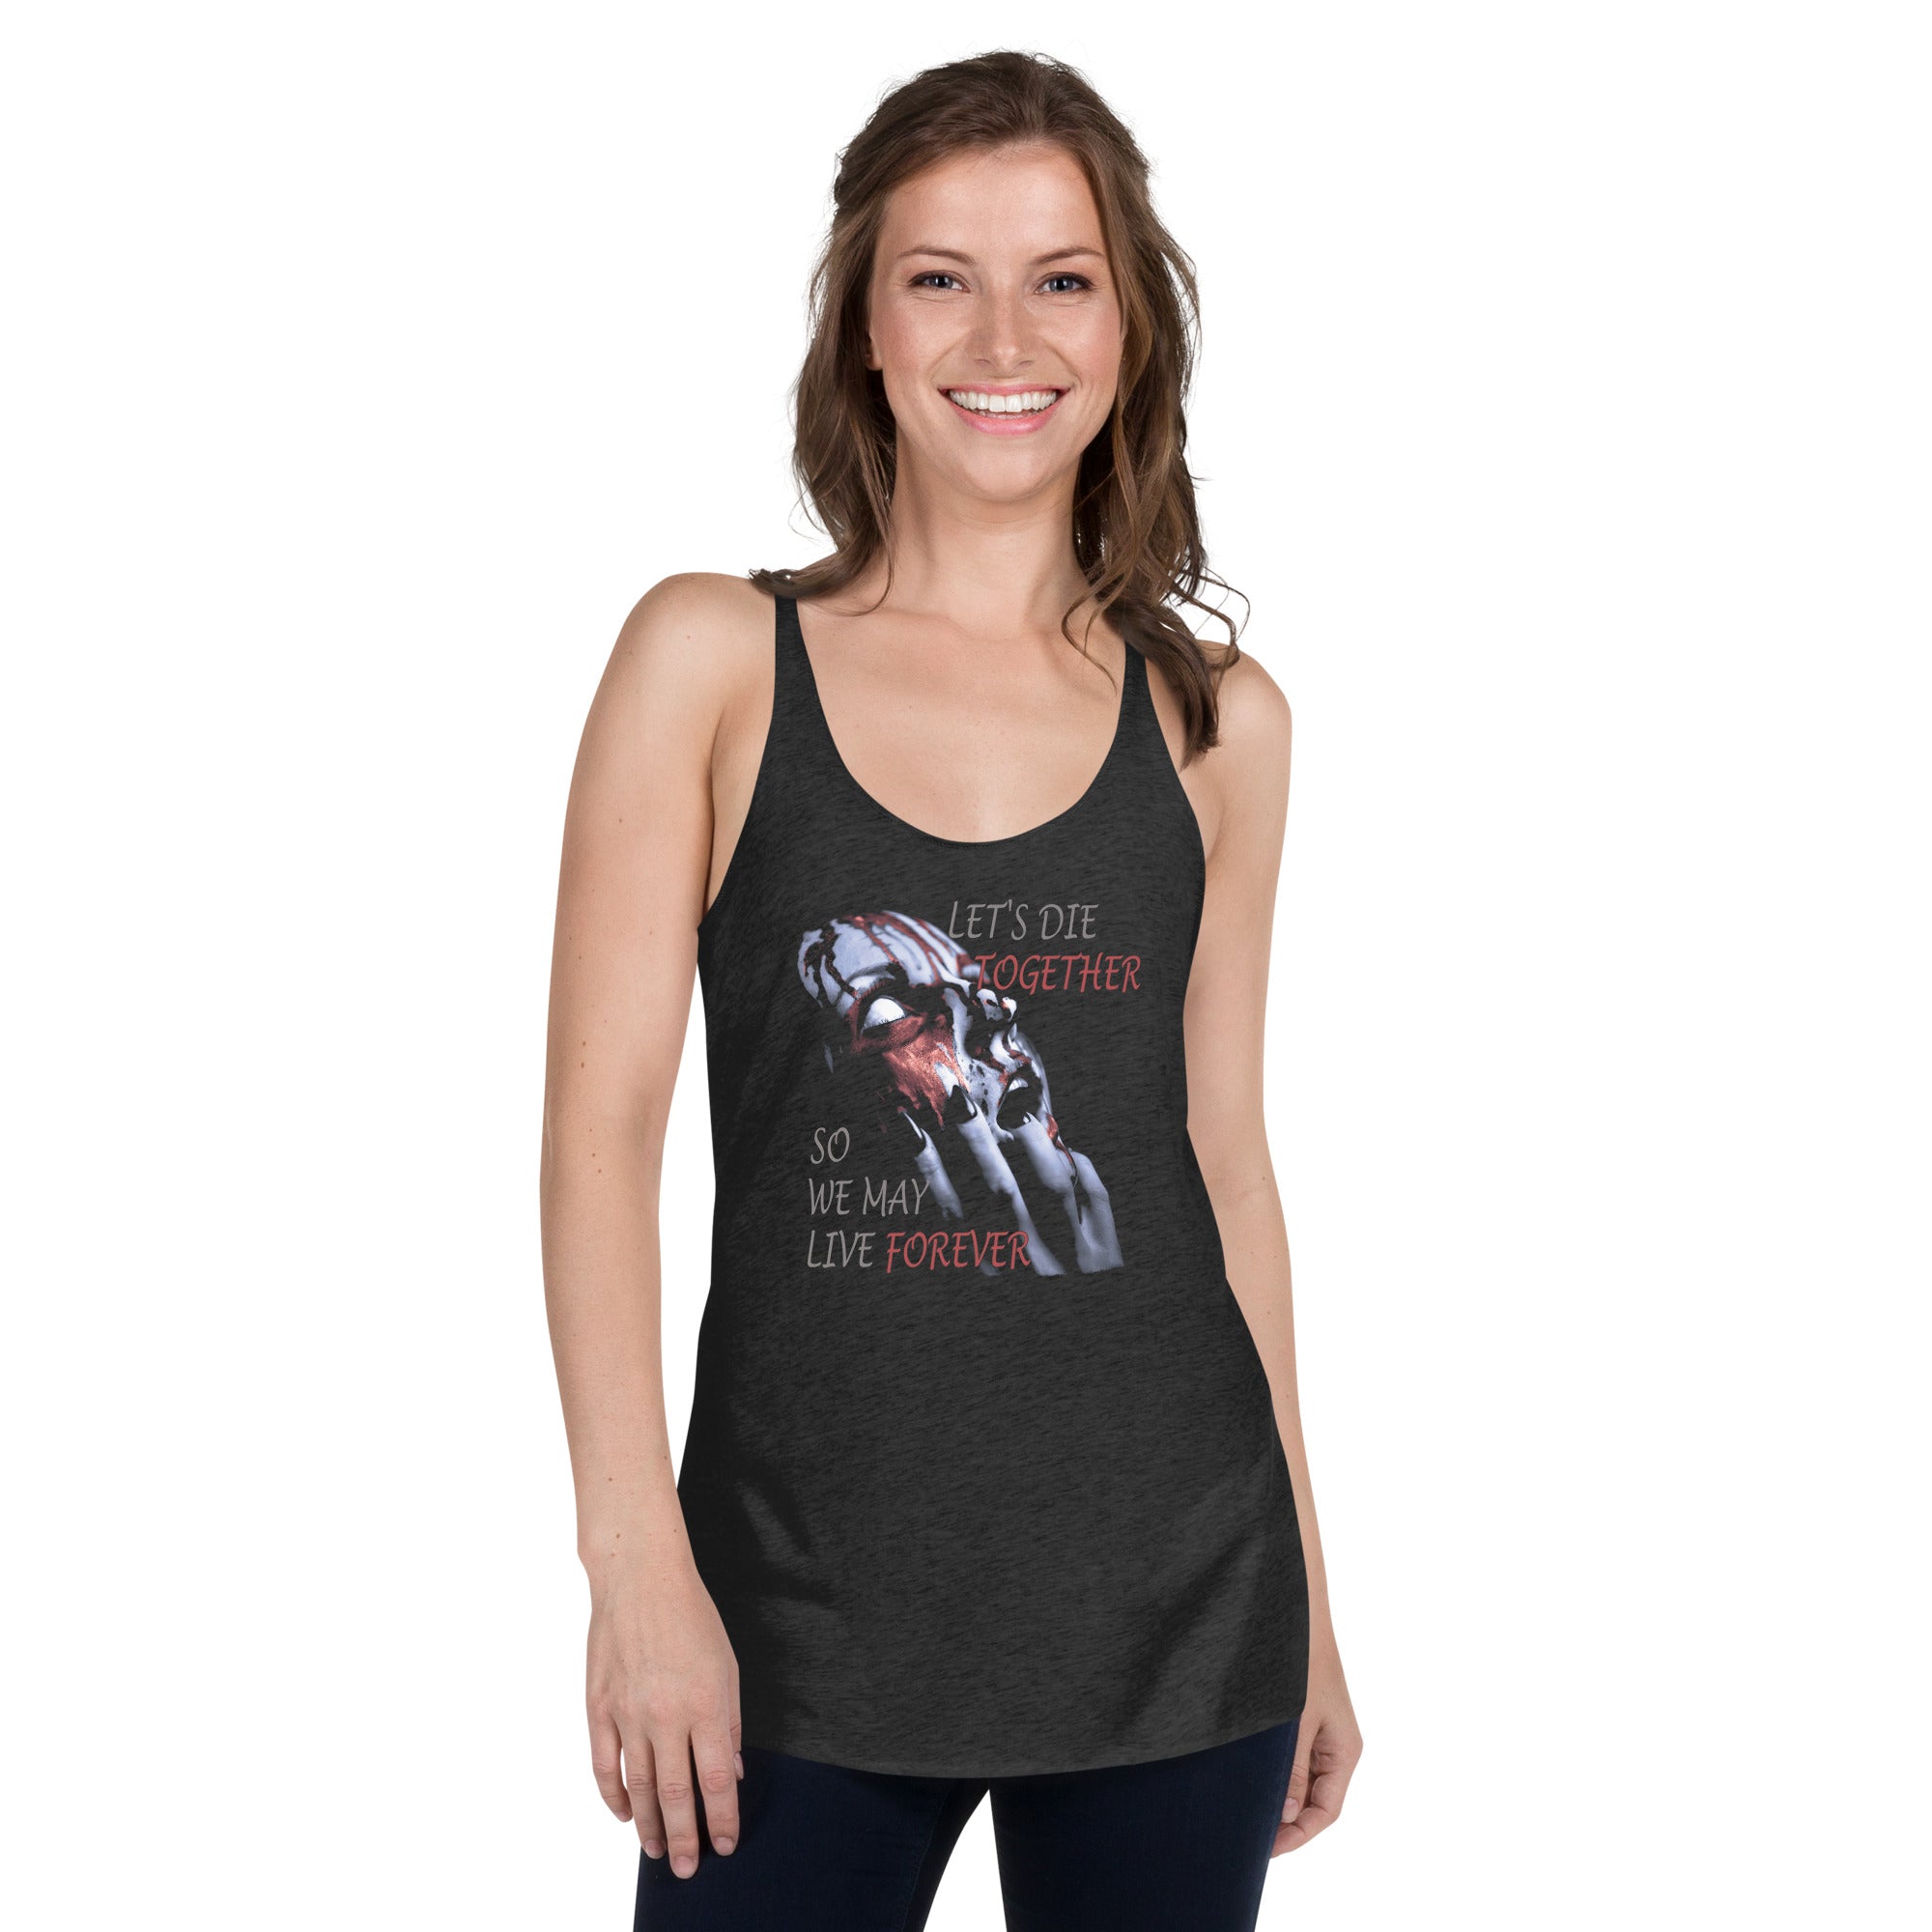 Together Forever Horror Gothic Fashion Women's Racerback Tank Top Shirt